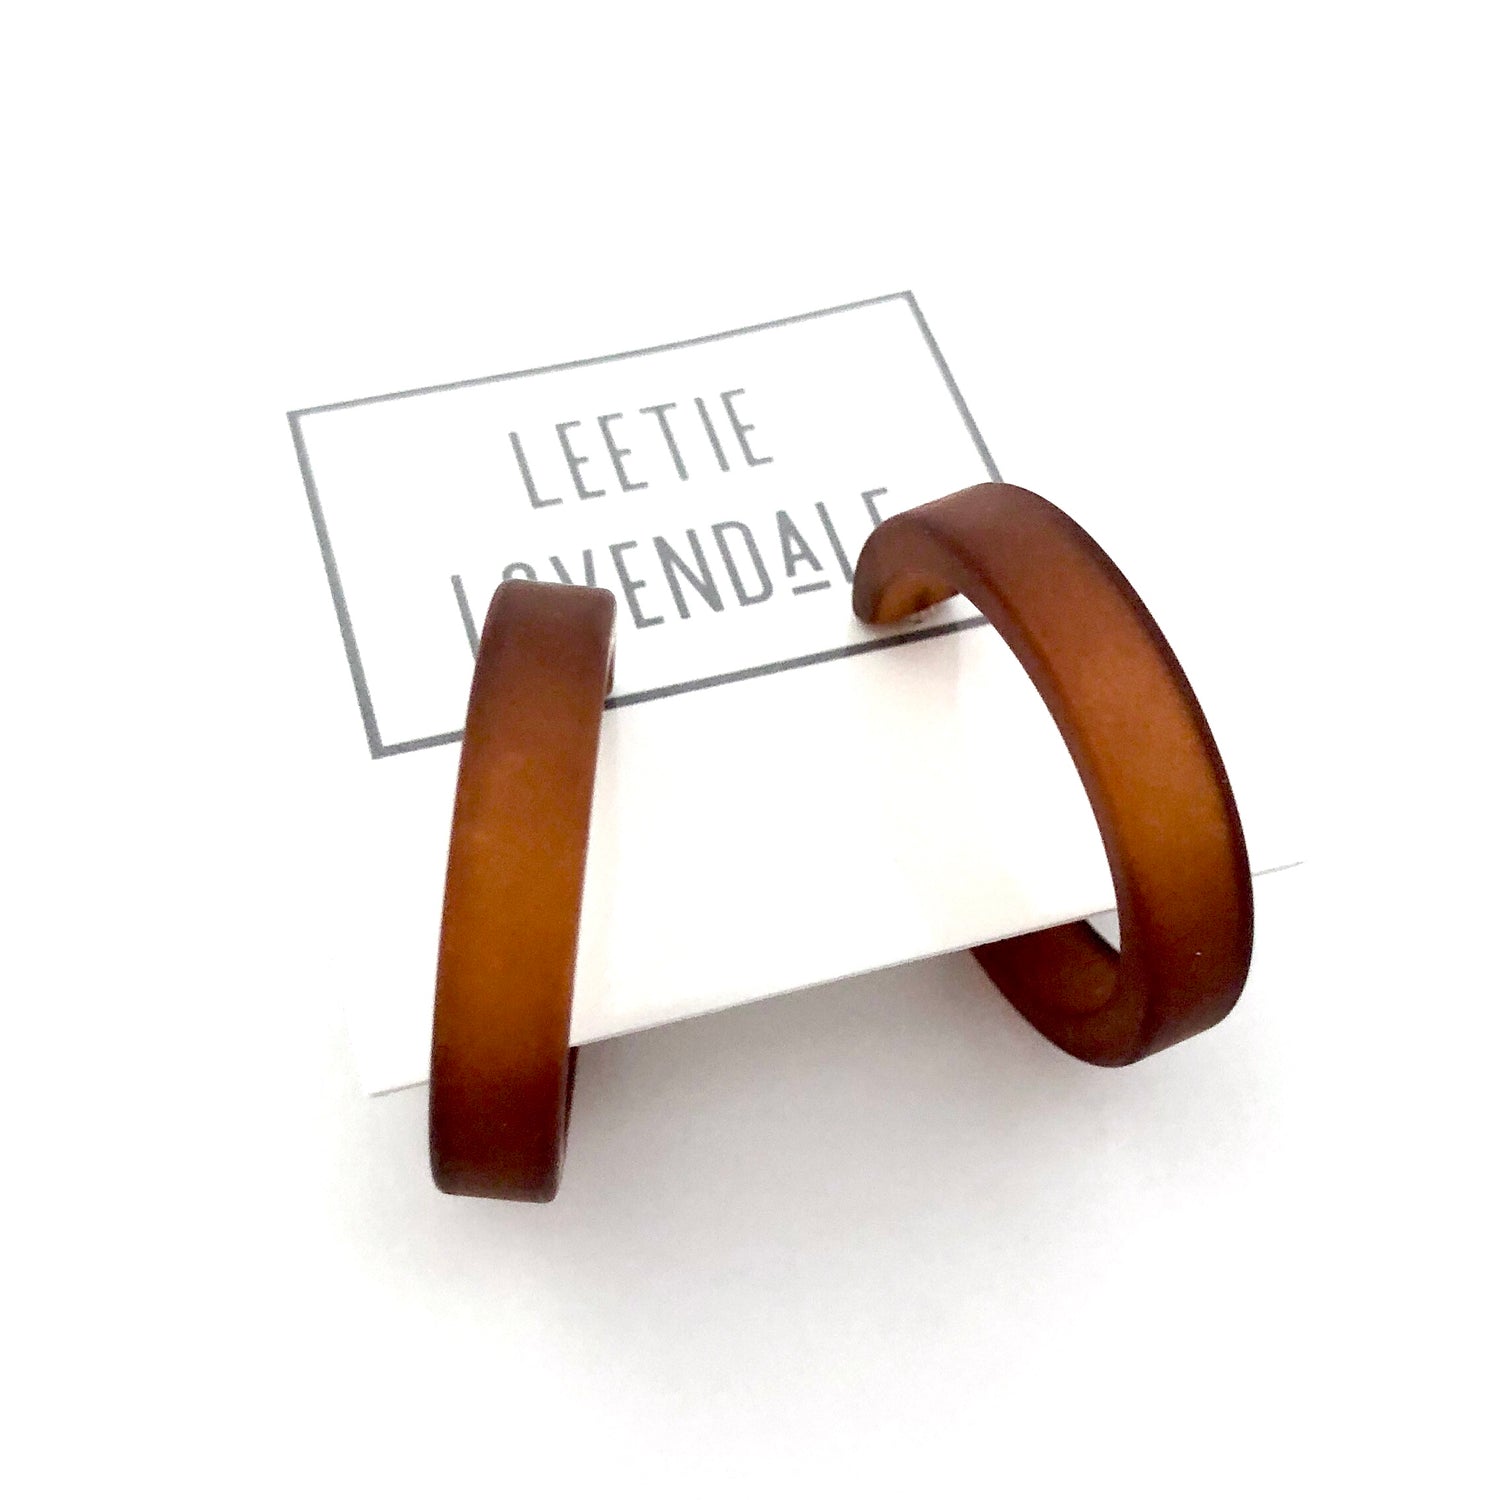 Mahogany Brown Frosted Small Classic Hoop Earrings